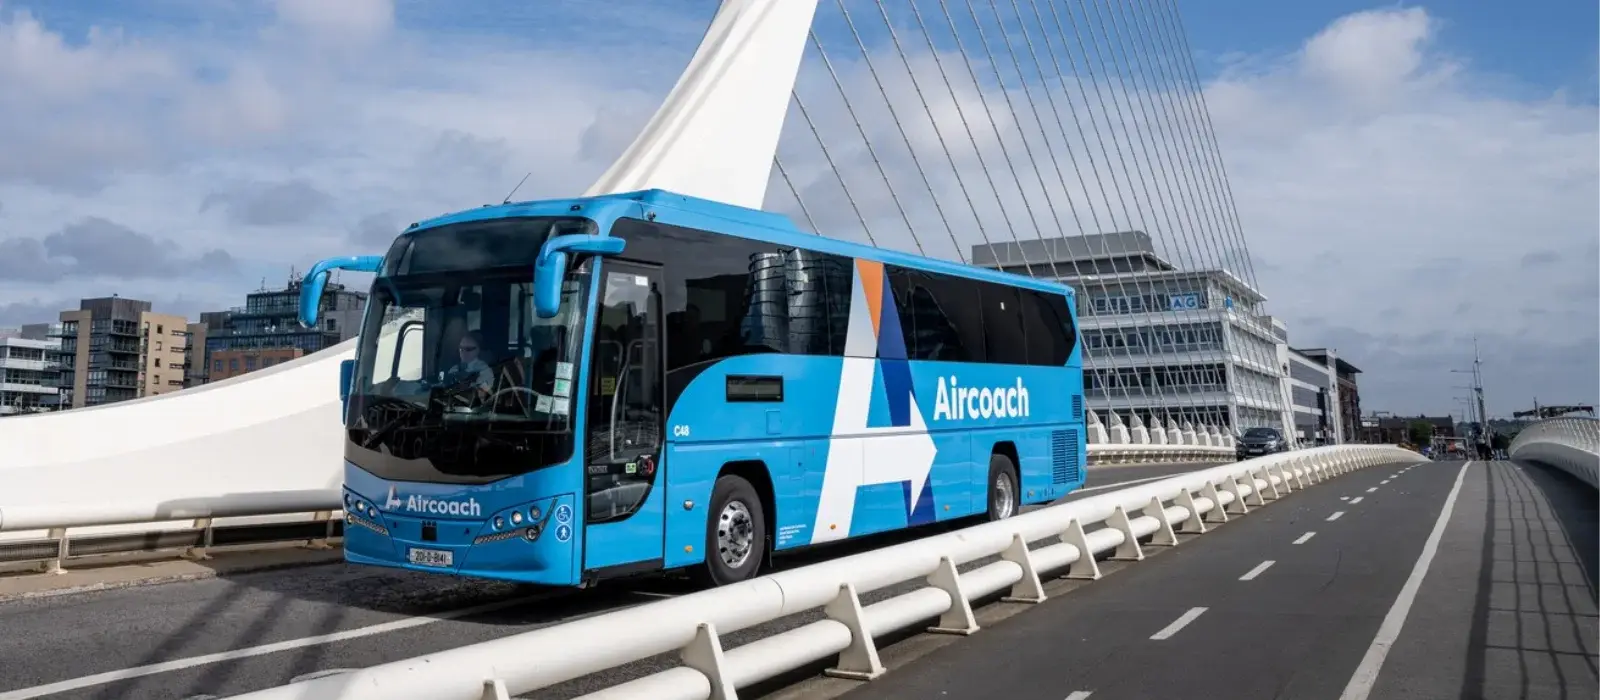 Aircoach Dublin to Galway Route closed operation